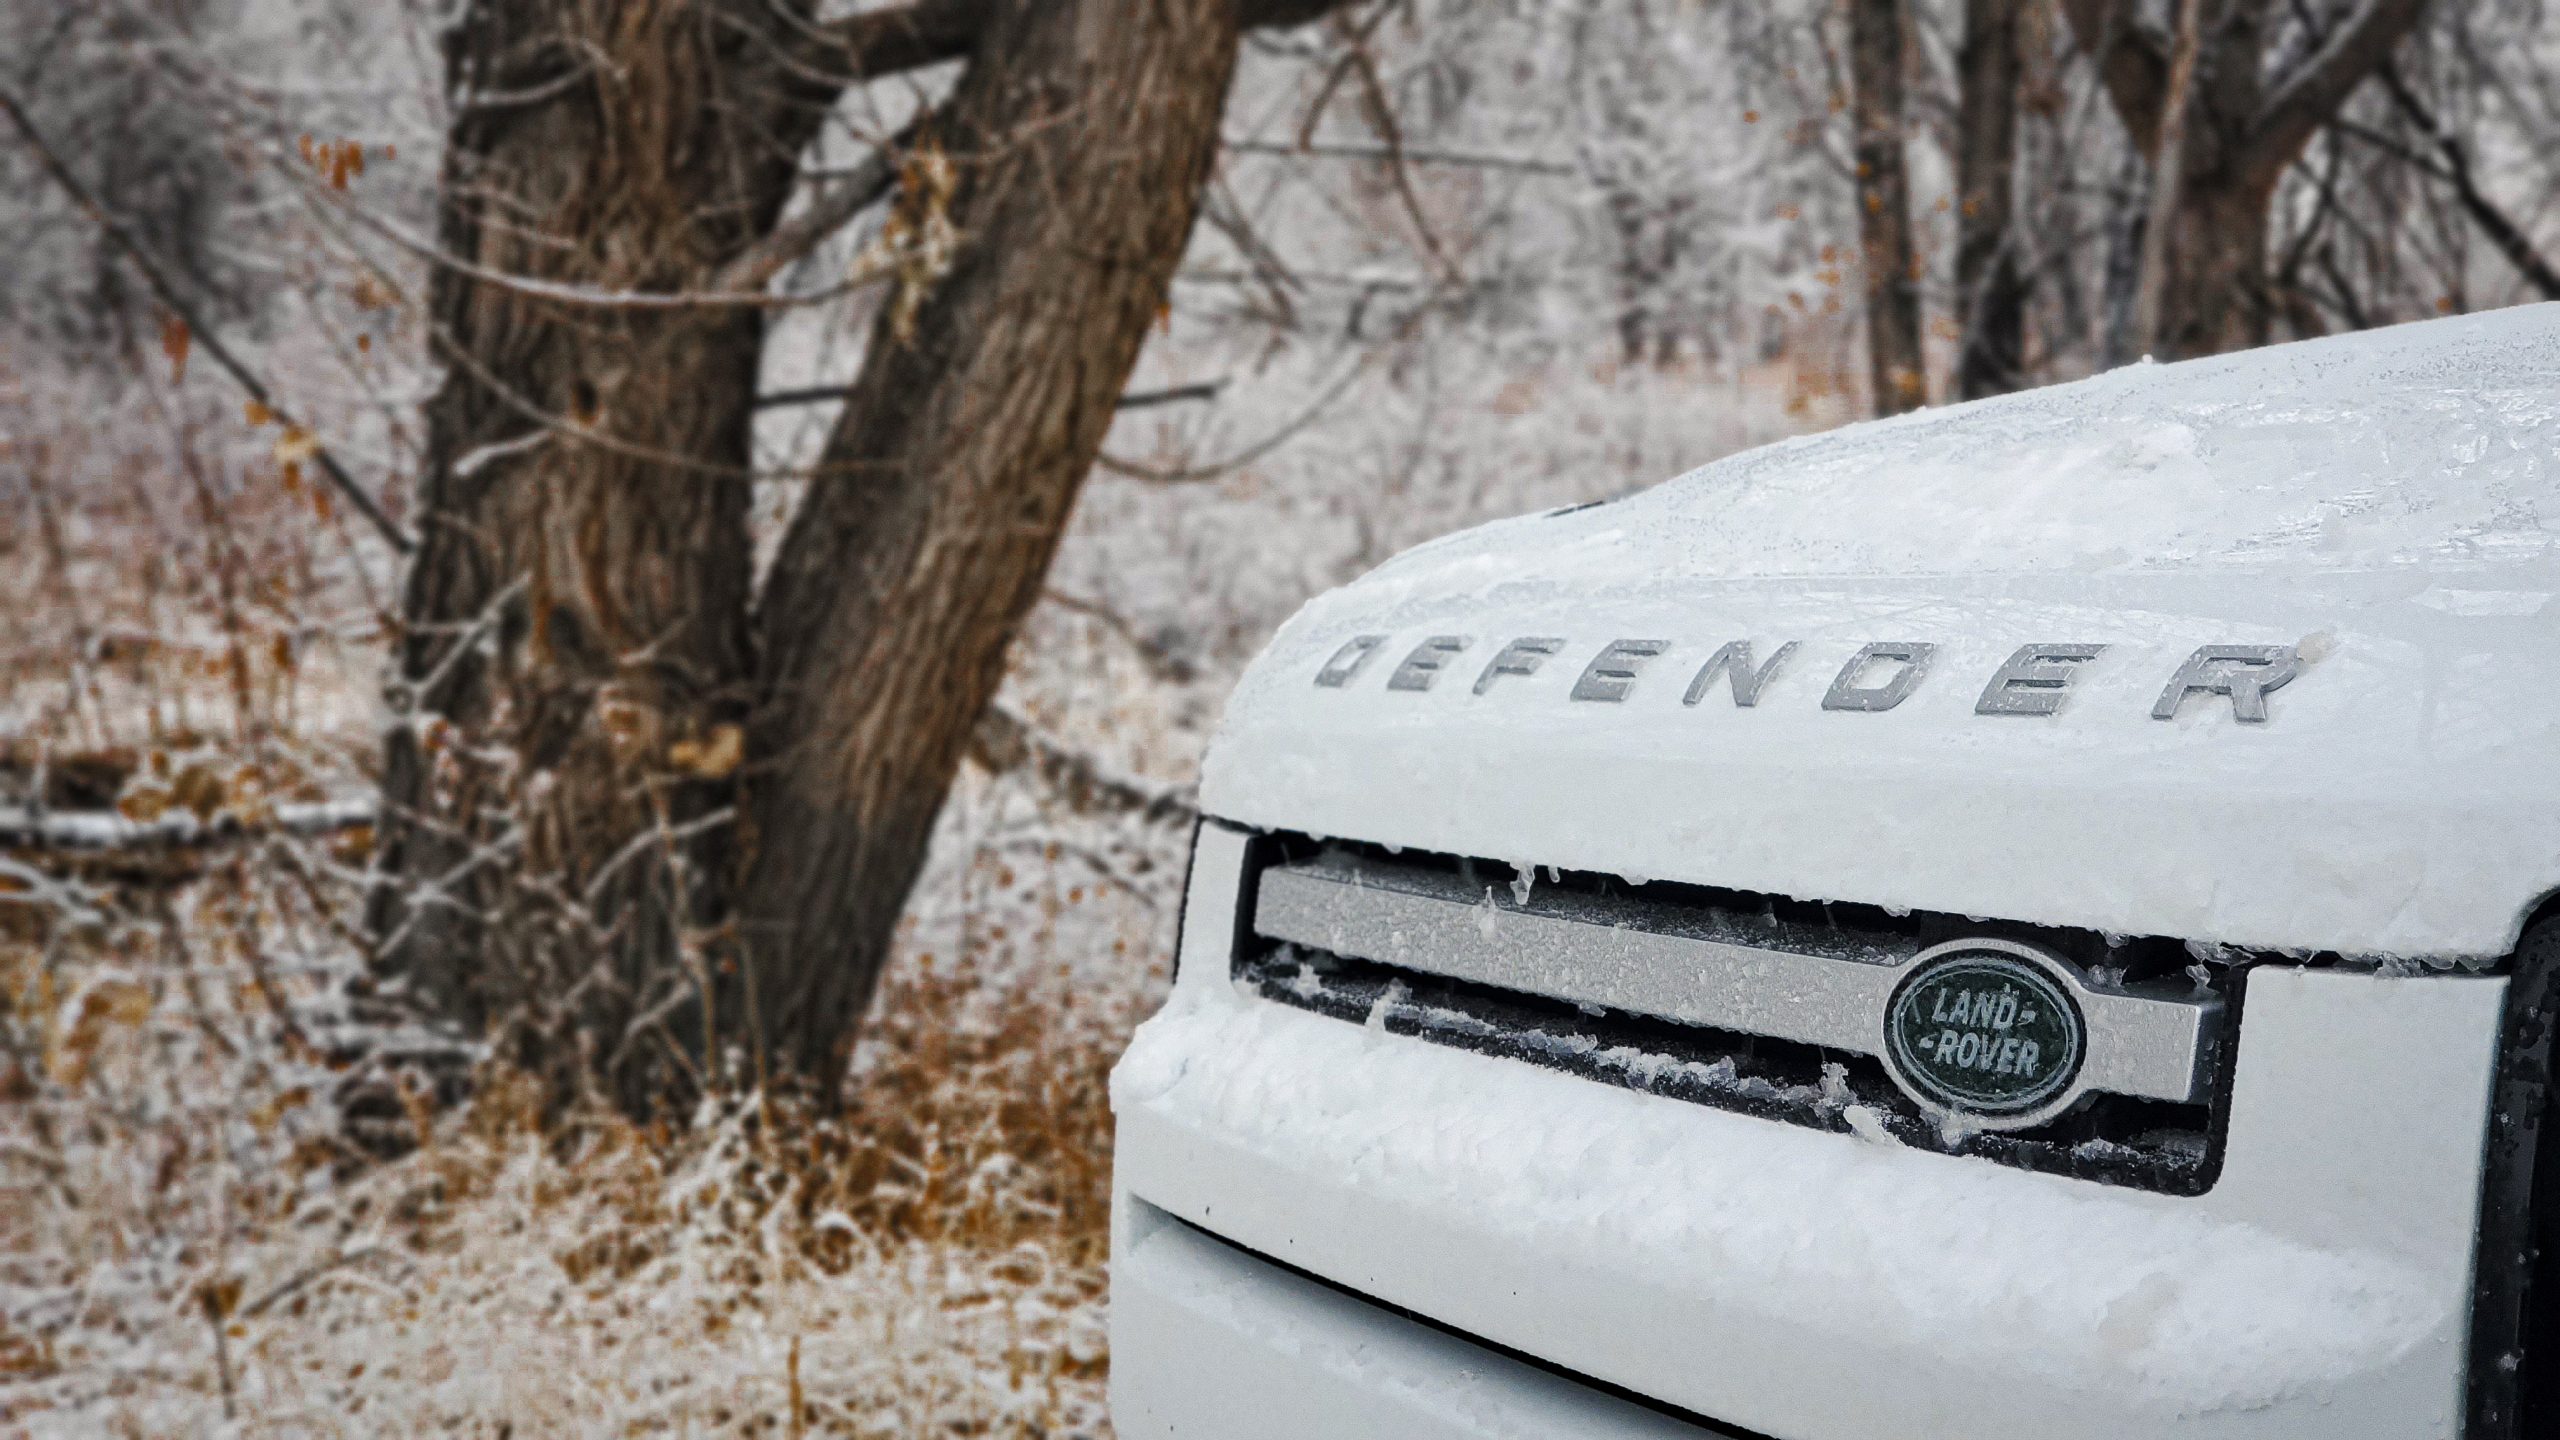 The badge of the Defender shot from the 3/4 angle on a snowy day